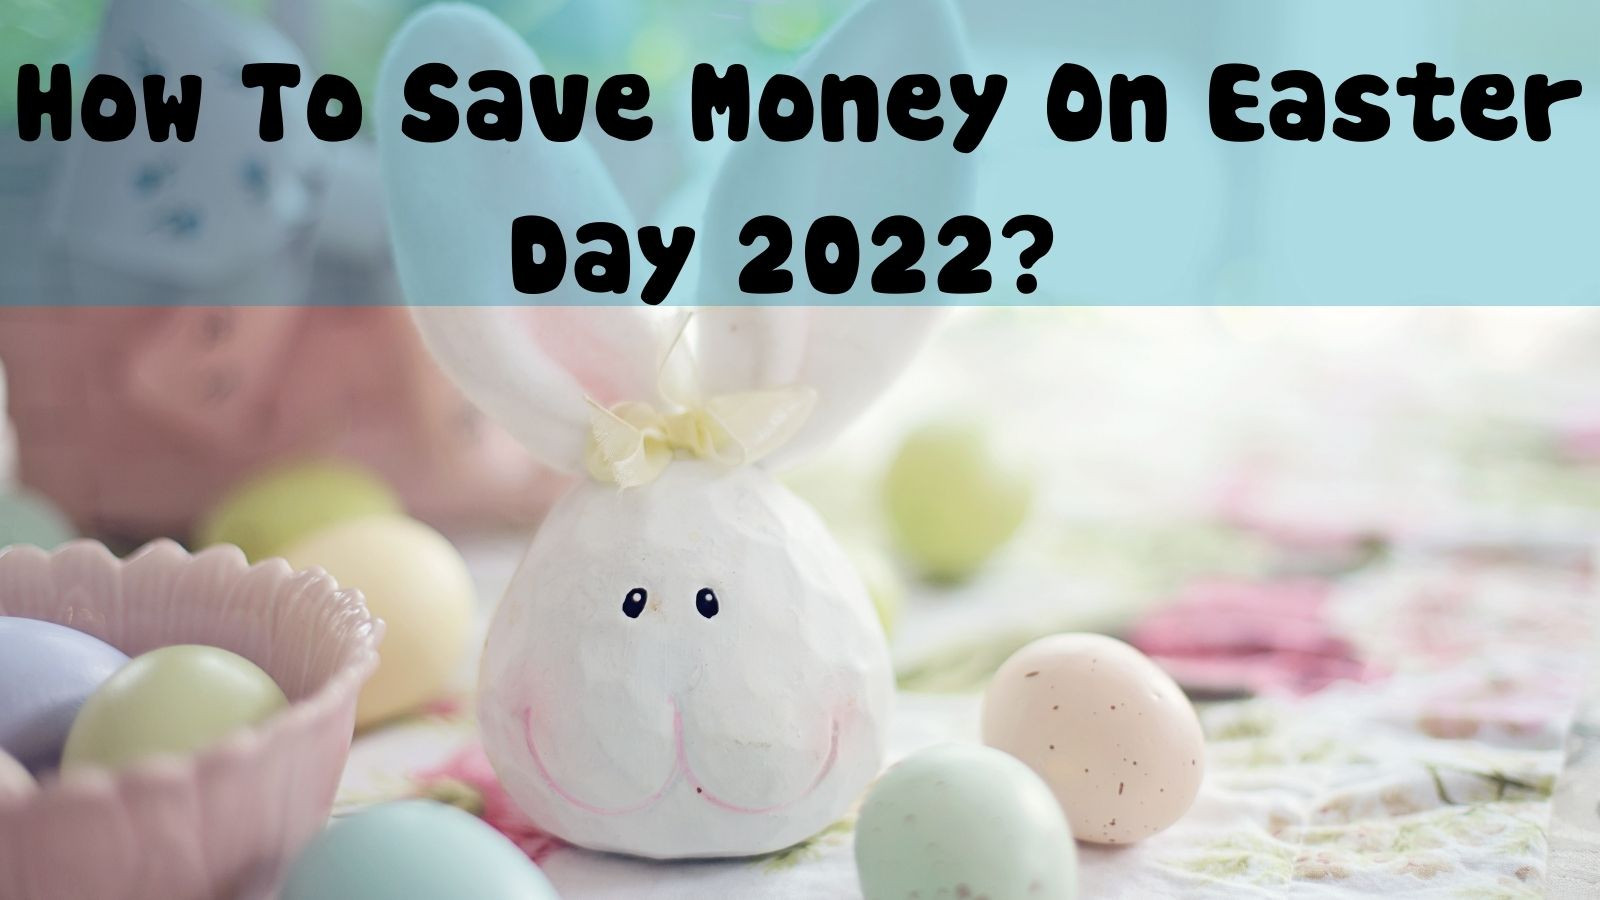 How To Save Money On Easter Day 2022?